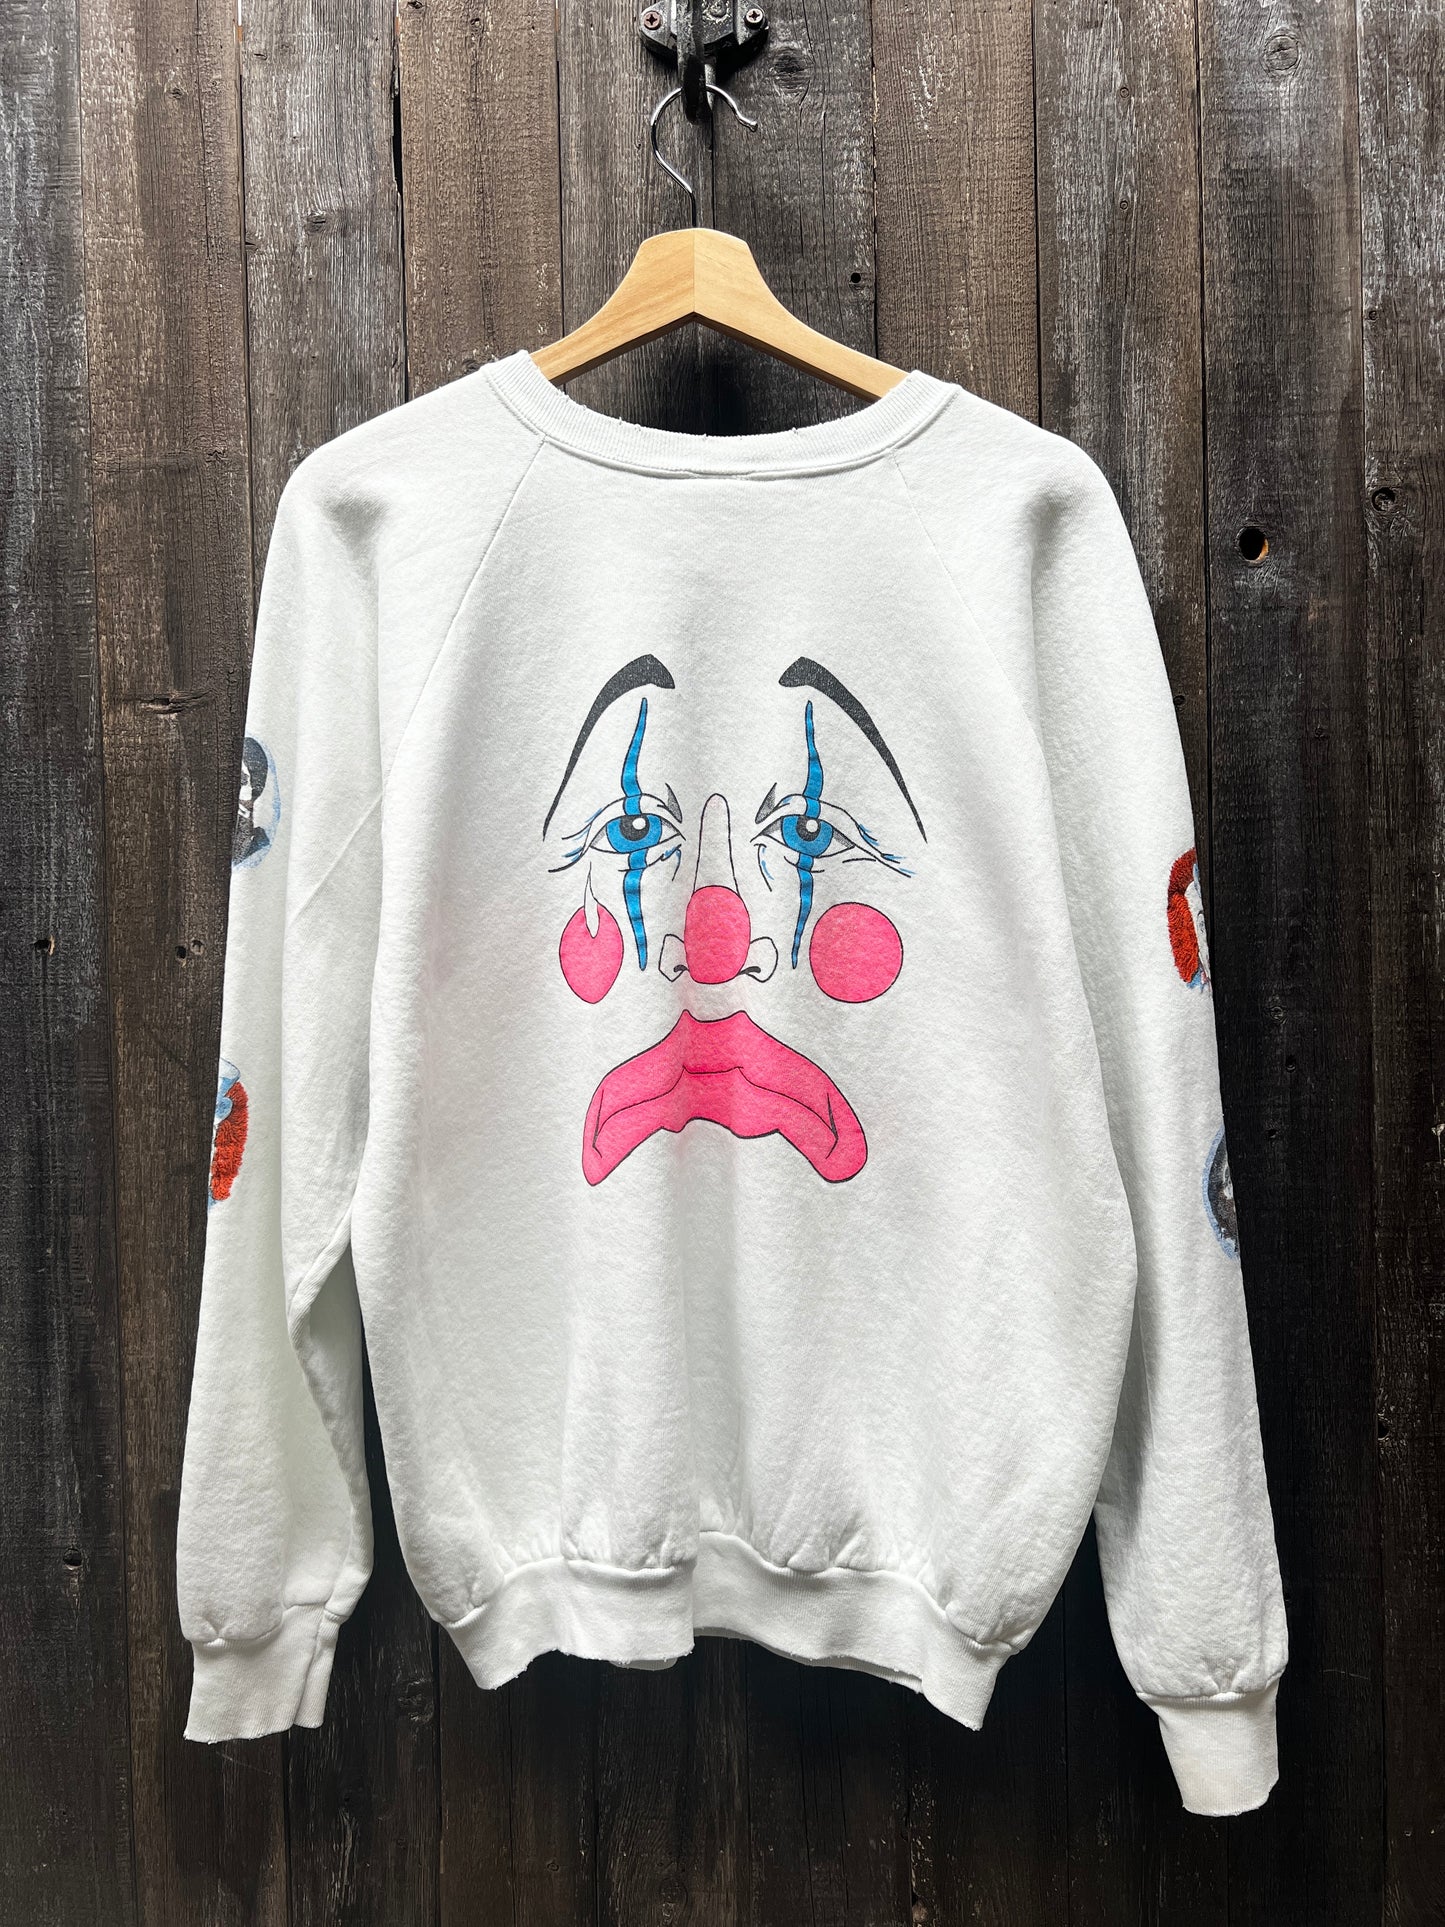 VINTAGE ALLOVER CLOWN SWEATSHIRT WITH CUSTOM HAND EMBROIDERY-L